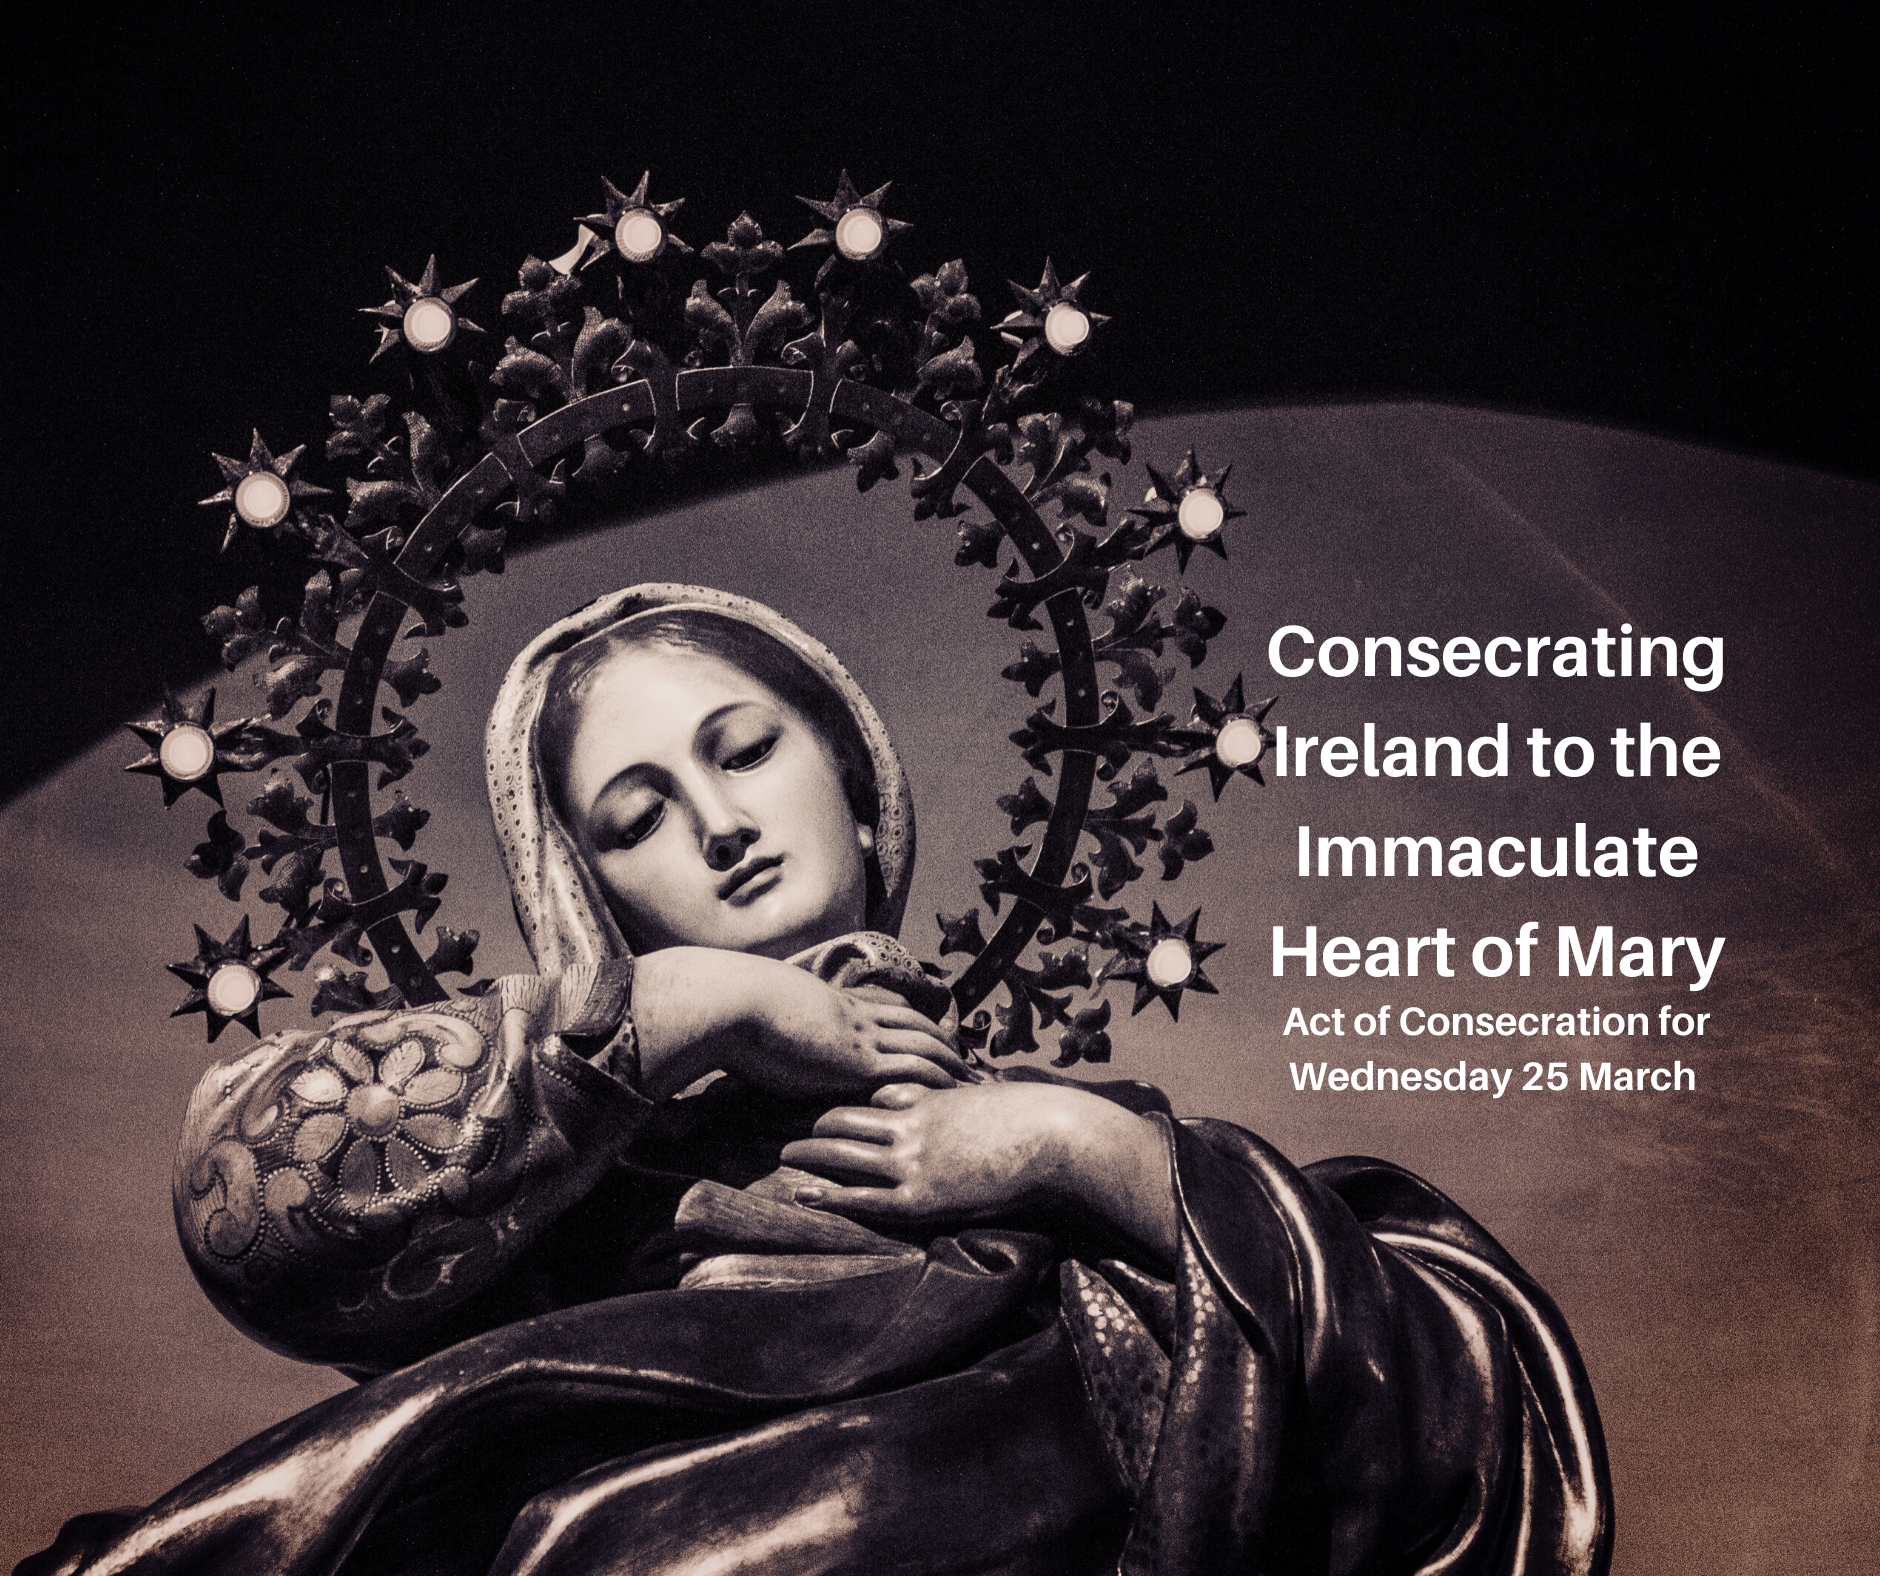 Order Of Service For Act Of Consecration Of Ireland To Immaculate Heart